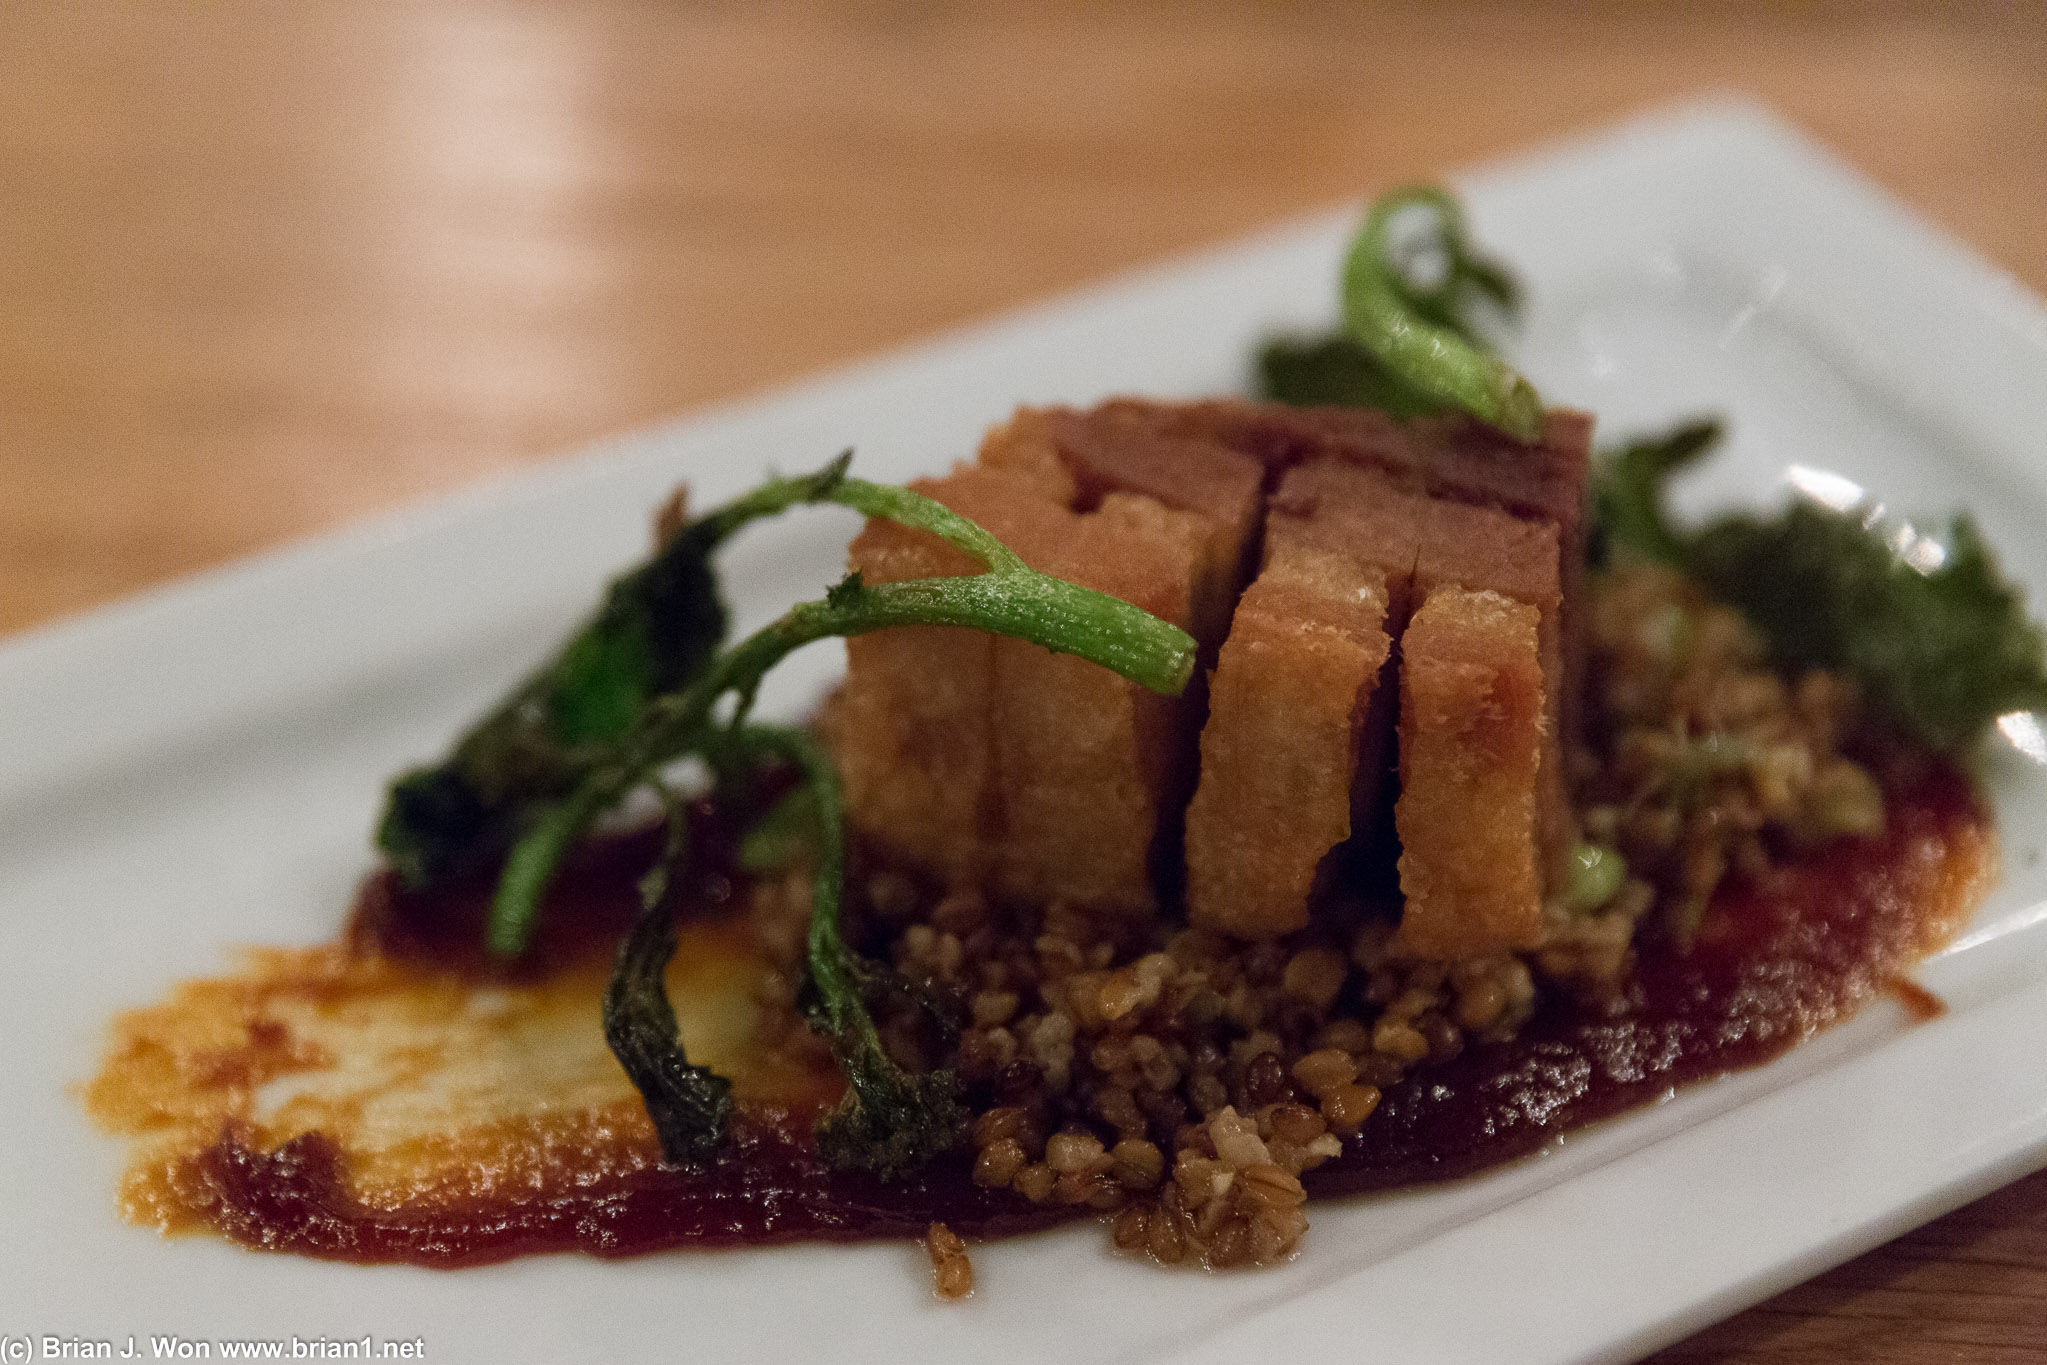 Pork belly. Prettiest but perhaps the most underwhelming. Nice crunch on the skin, rest was just ok.